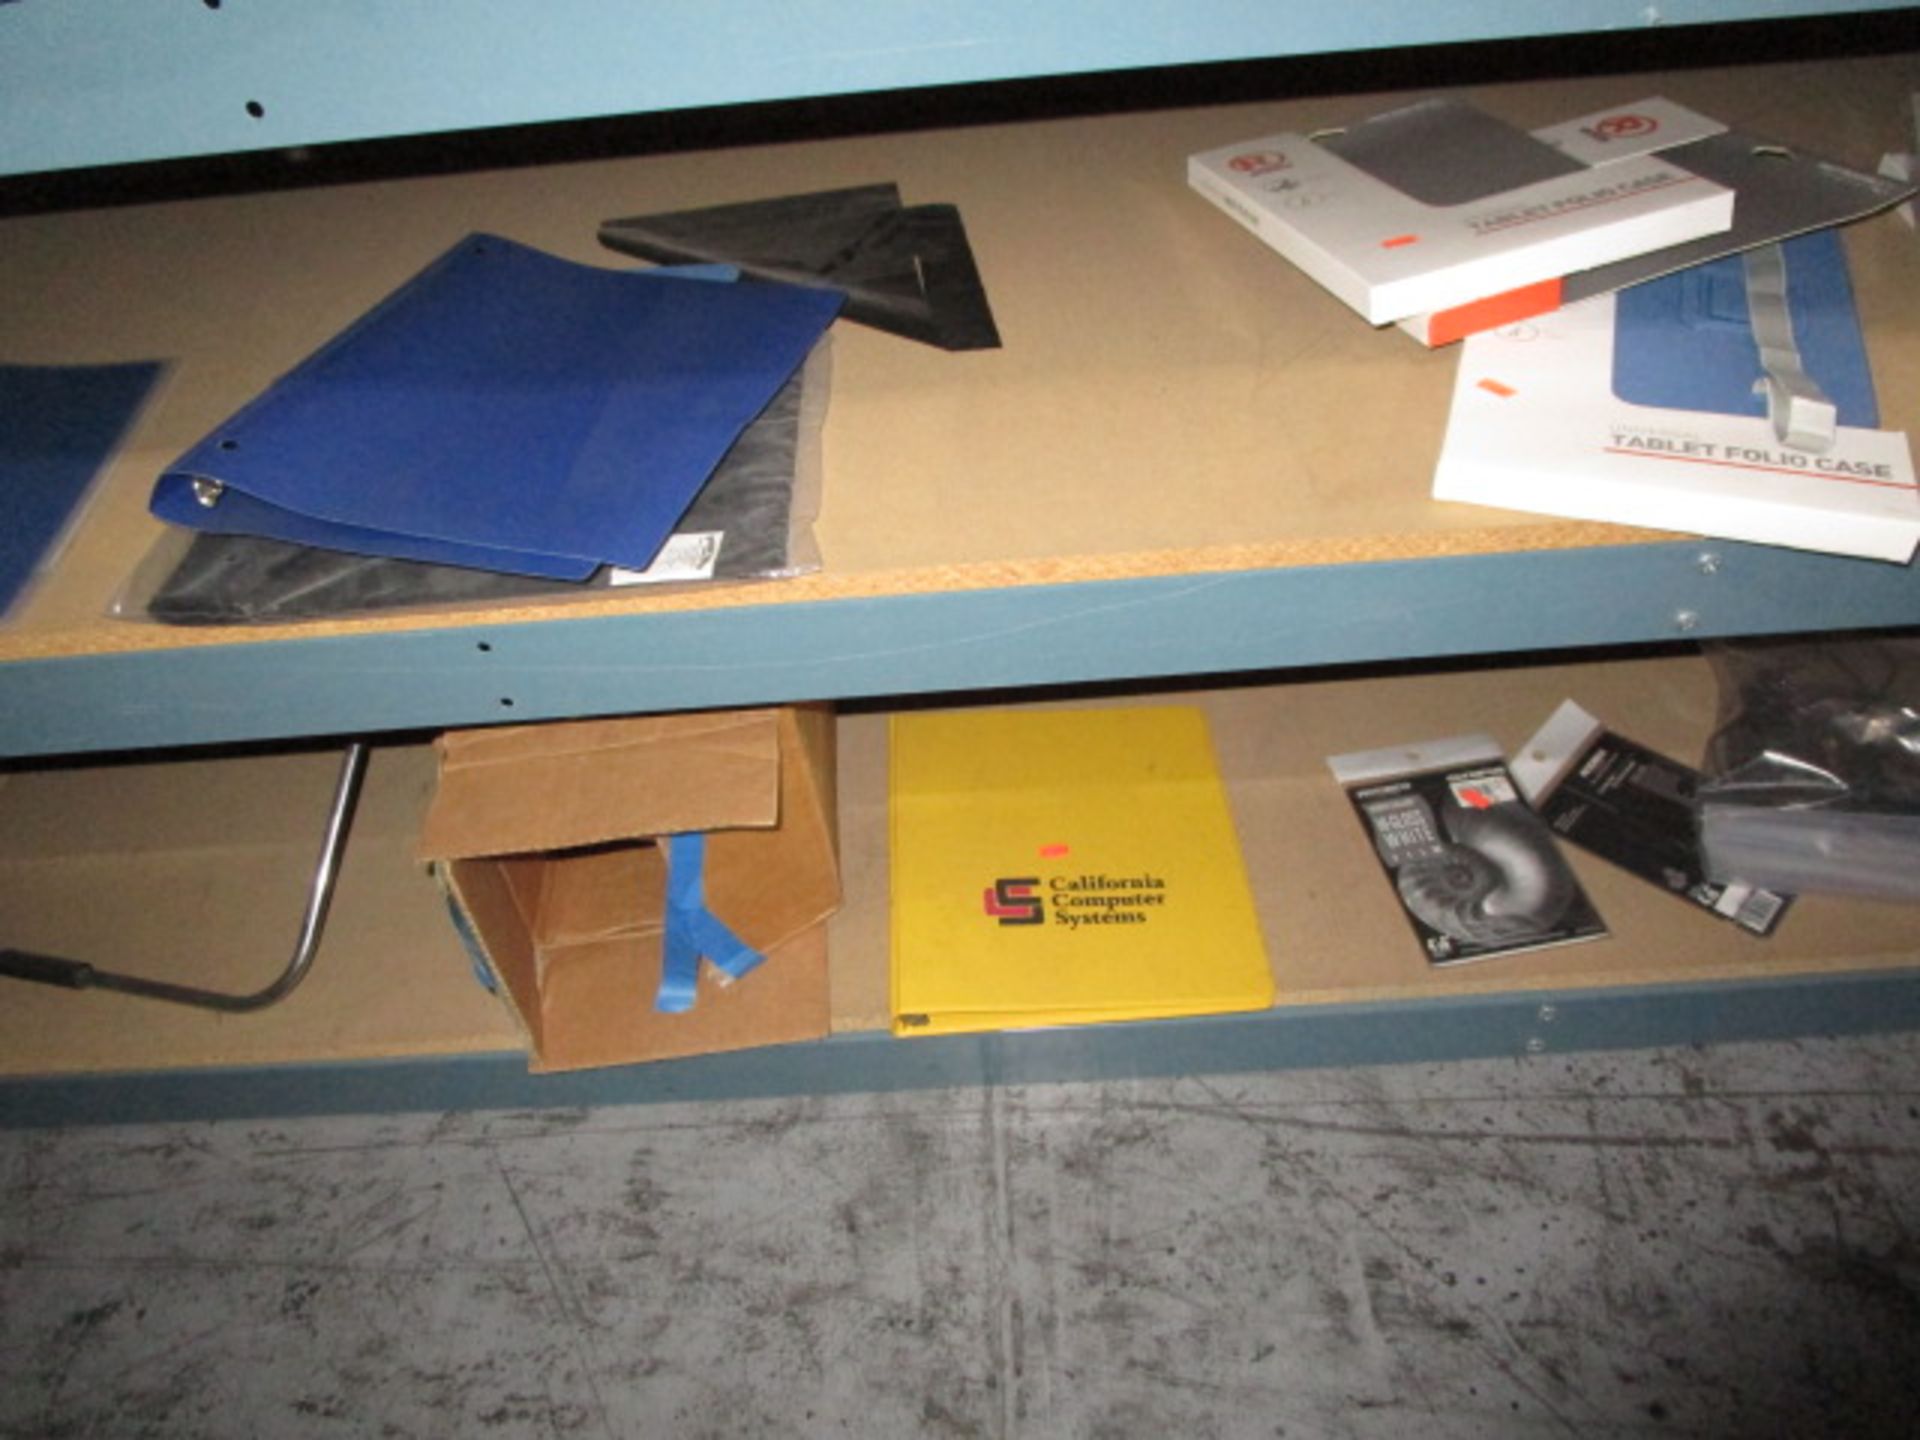 SHELVING UNIT OF ASSORTMENT OF ATTENTION CONES, MARKERS, BINDERS - Image 13 of 14